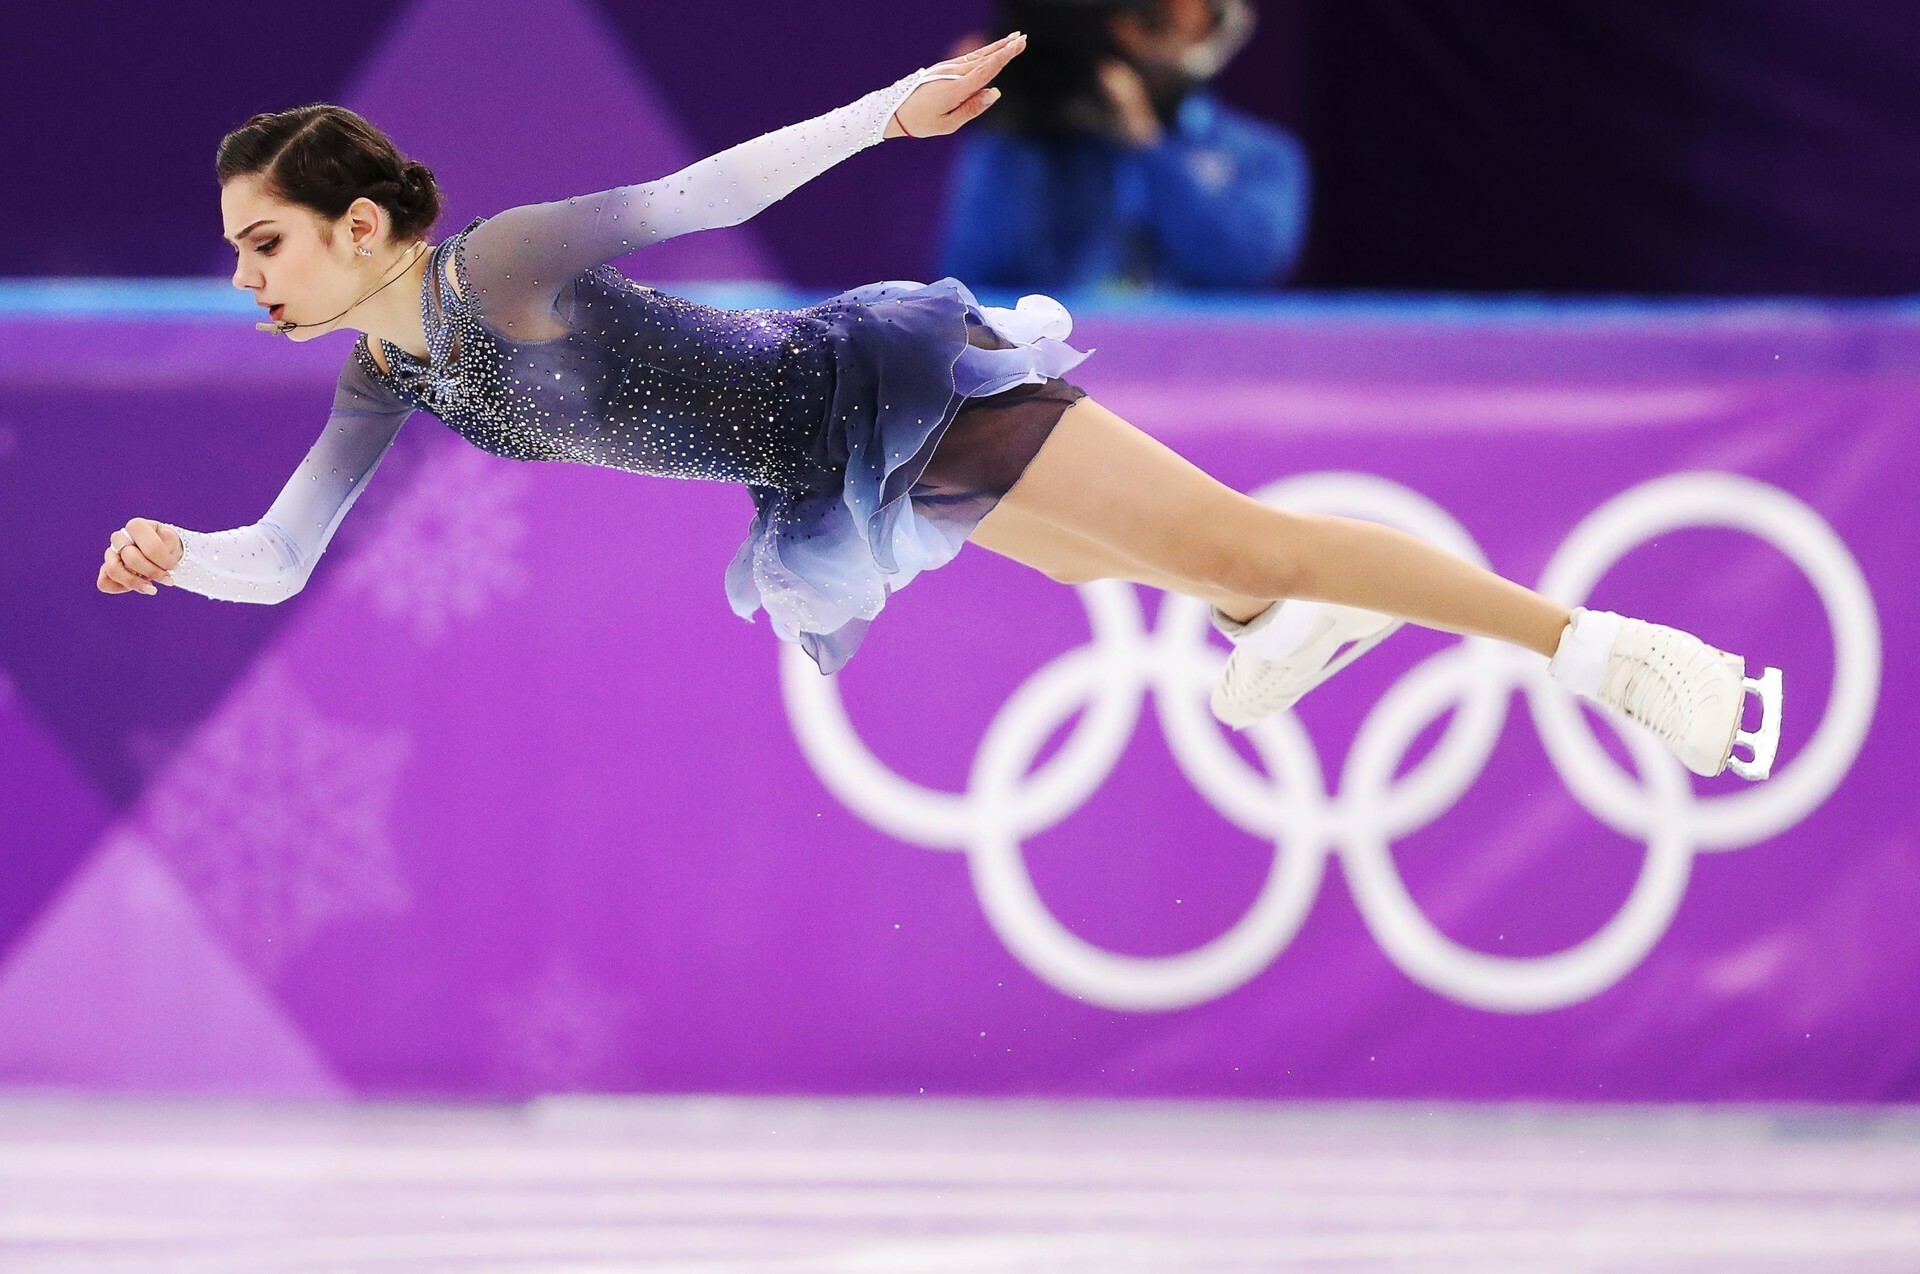 Evgenia Medvedeva: She earned an Olympic silver medal at the 2018 Winter Olympics. 1920x1280 HD Background.